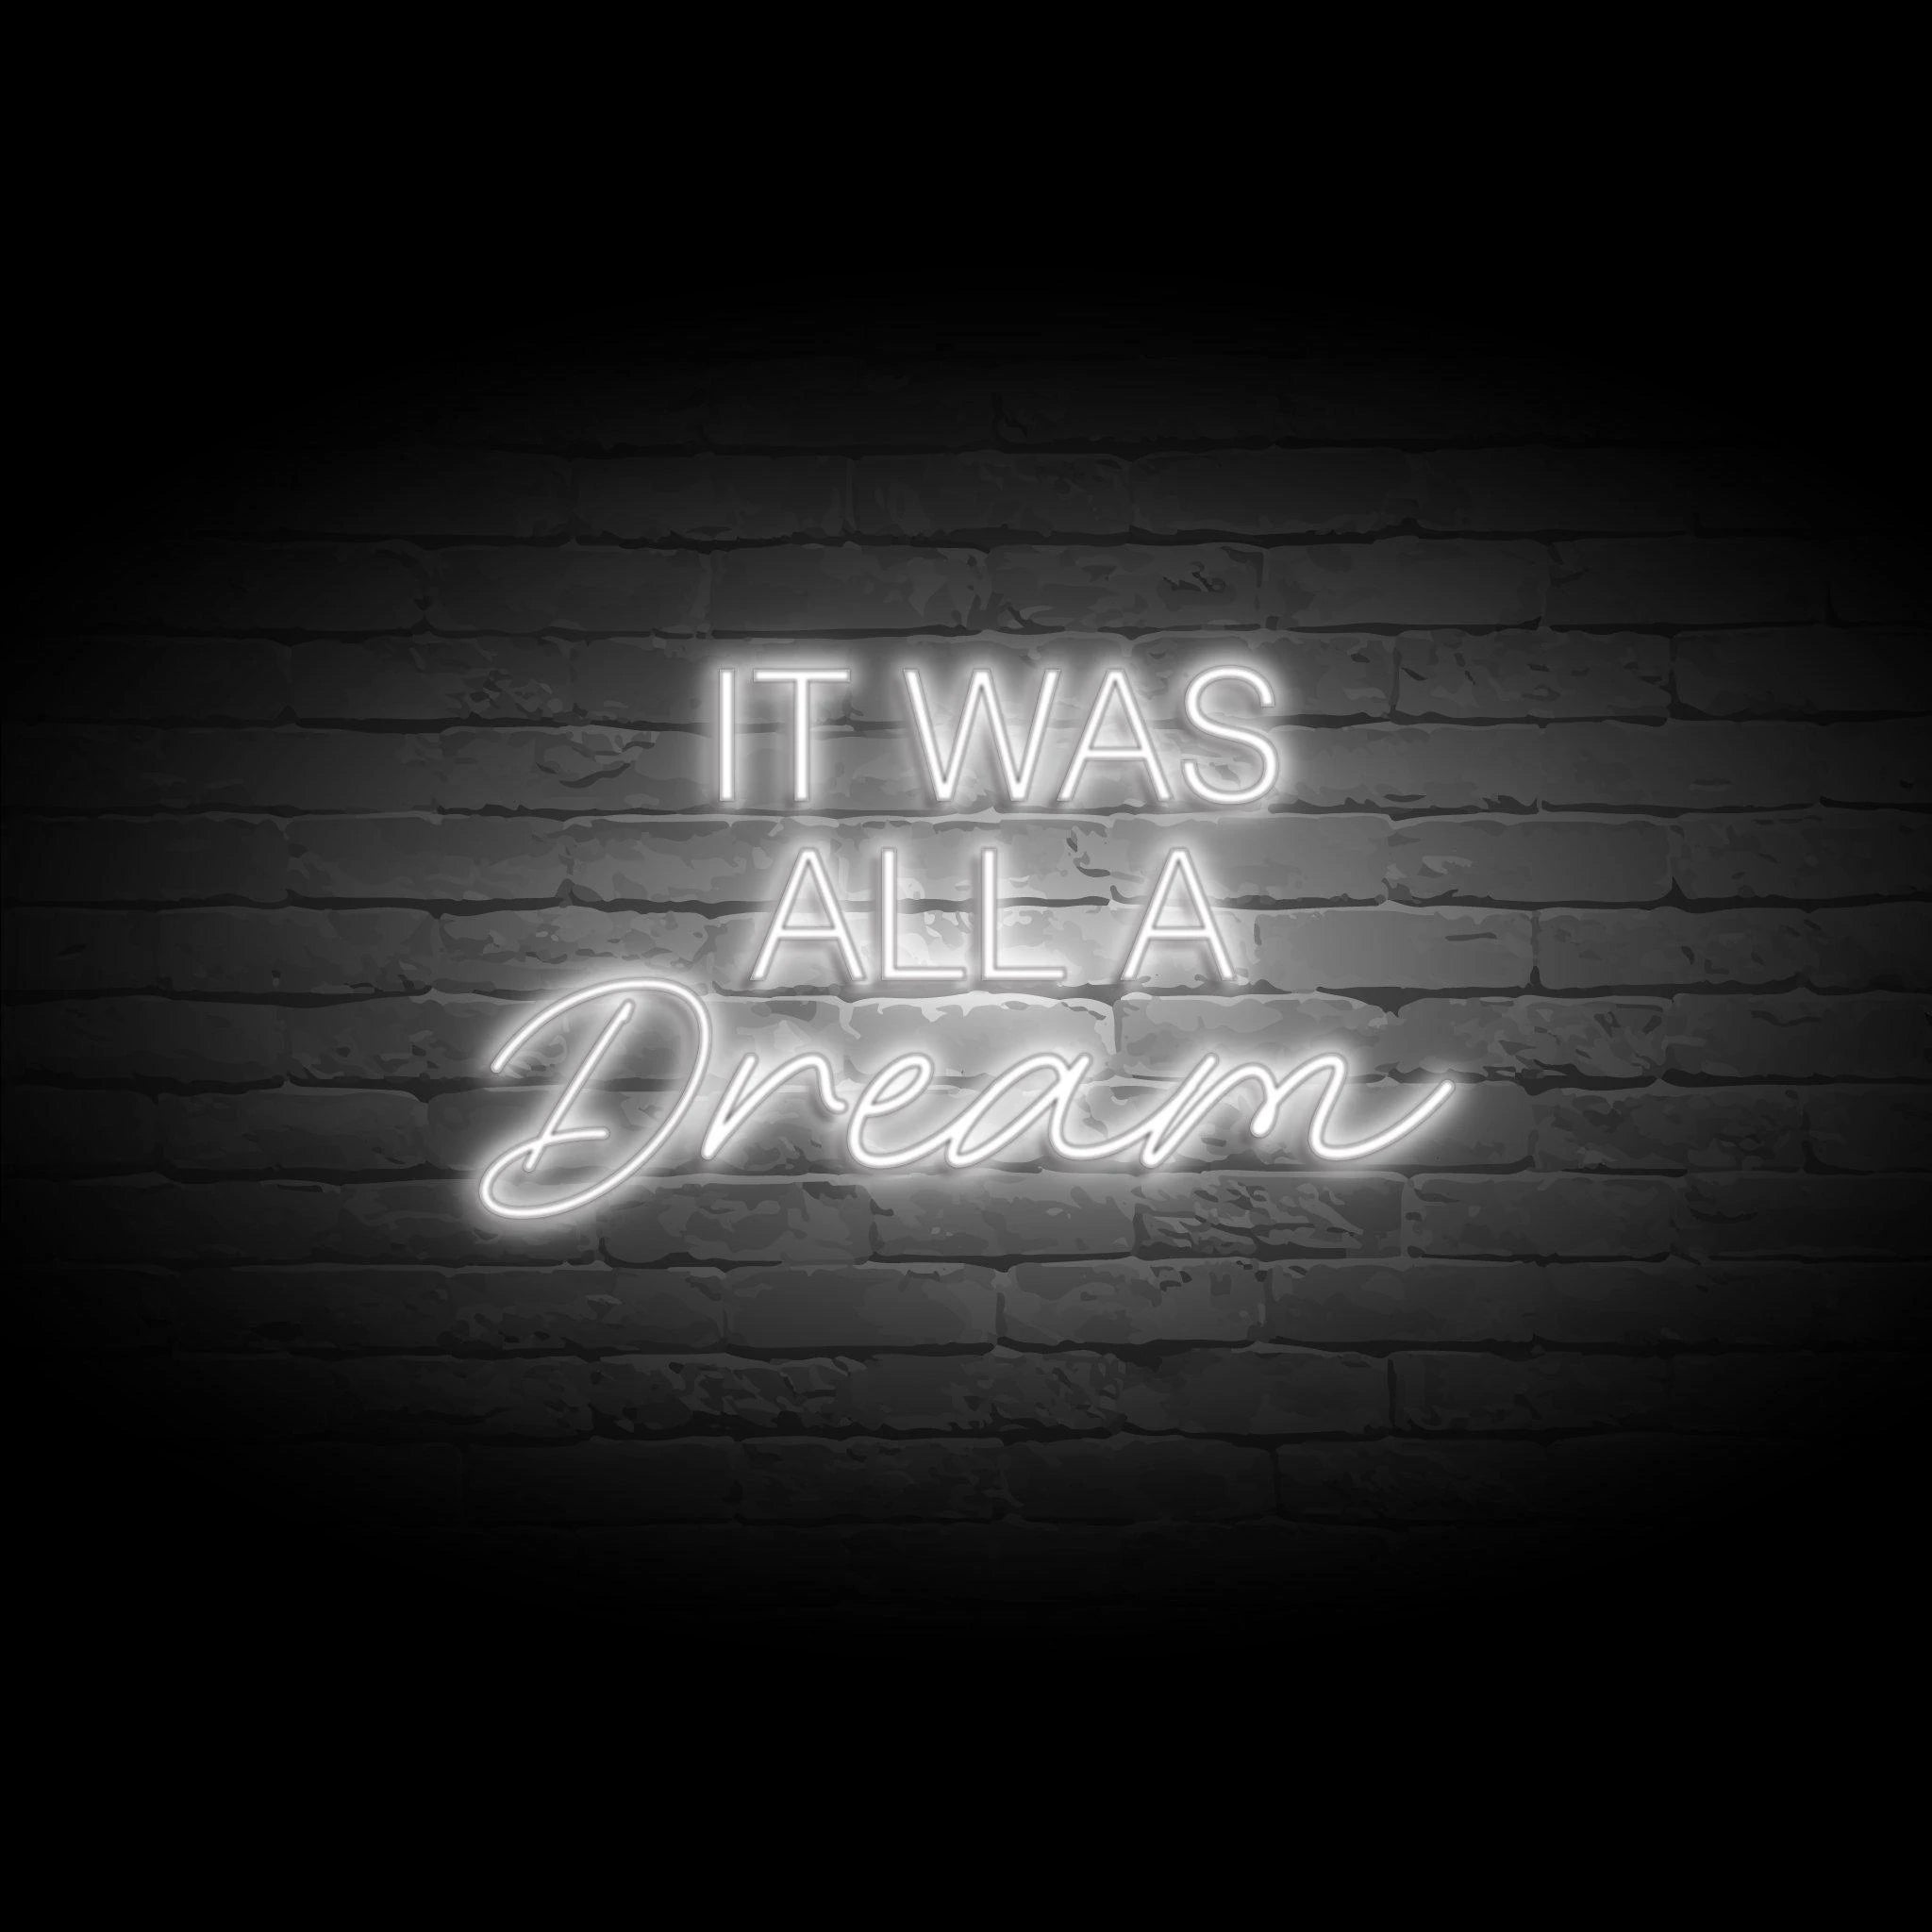 'IT WAS ALL A DREAM' NEON SIGN - NeonFerry